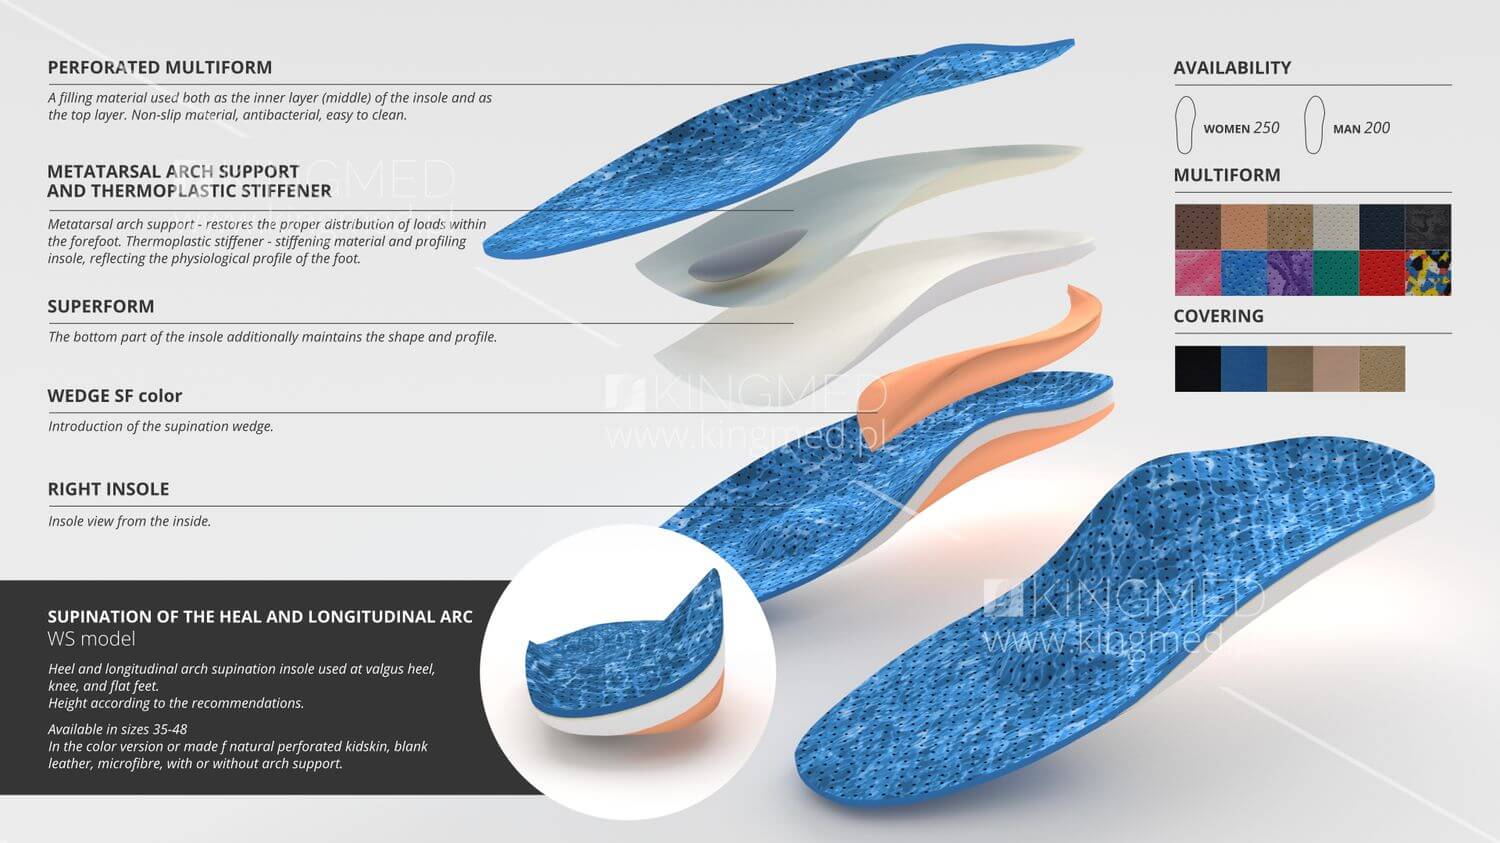 Orthopedic insoles supination of the heal and longitudinal arc WS model